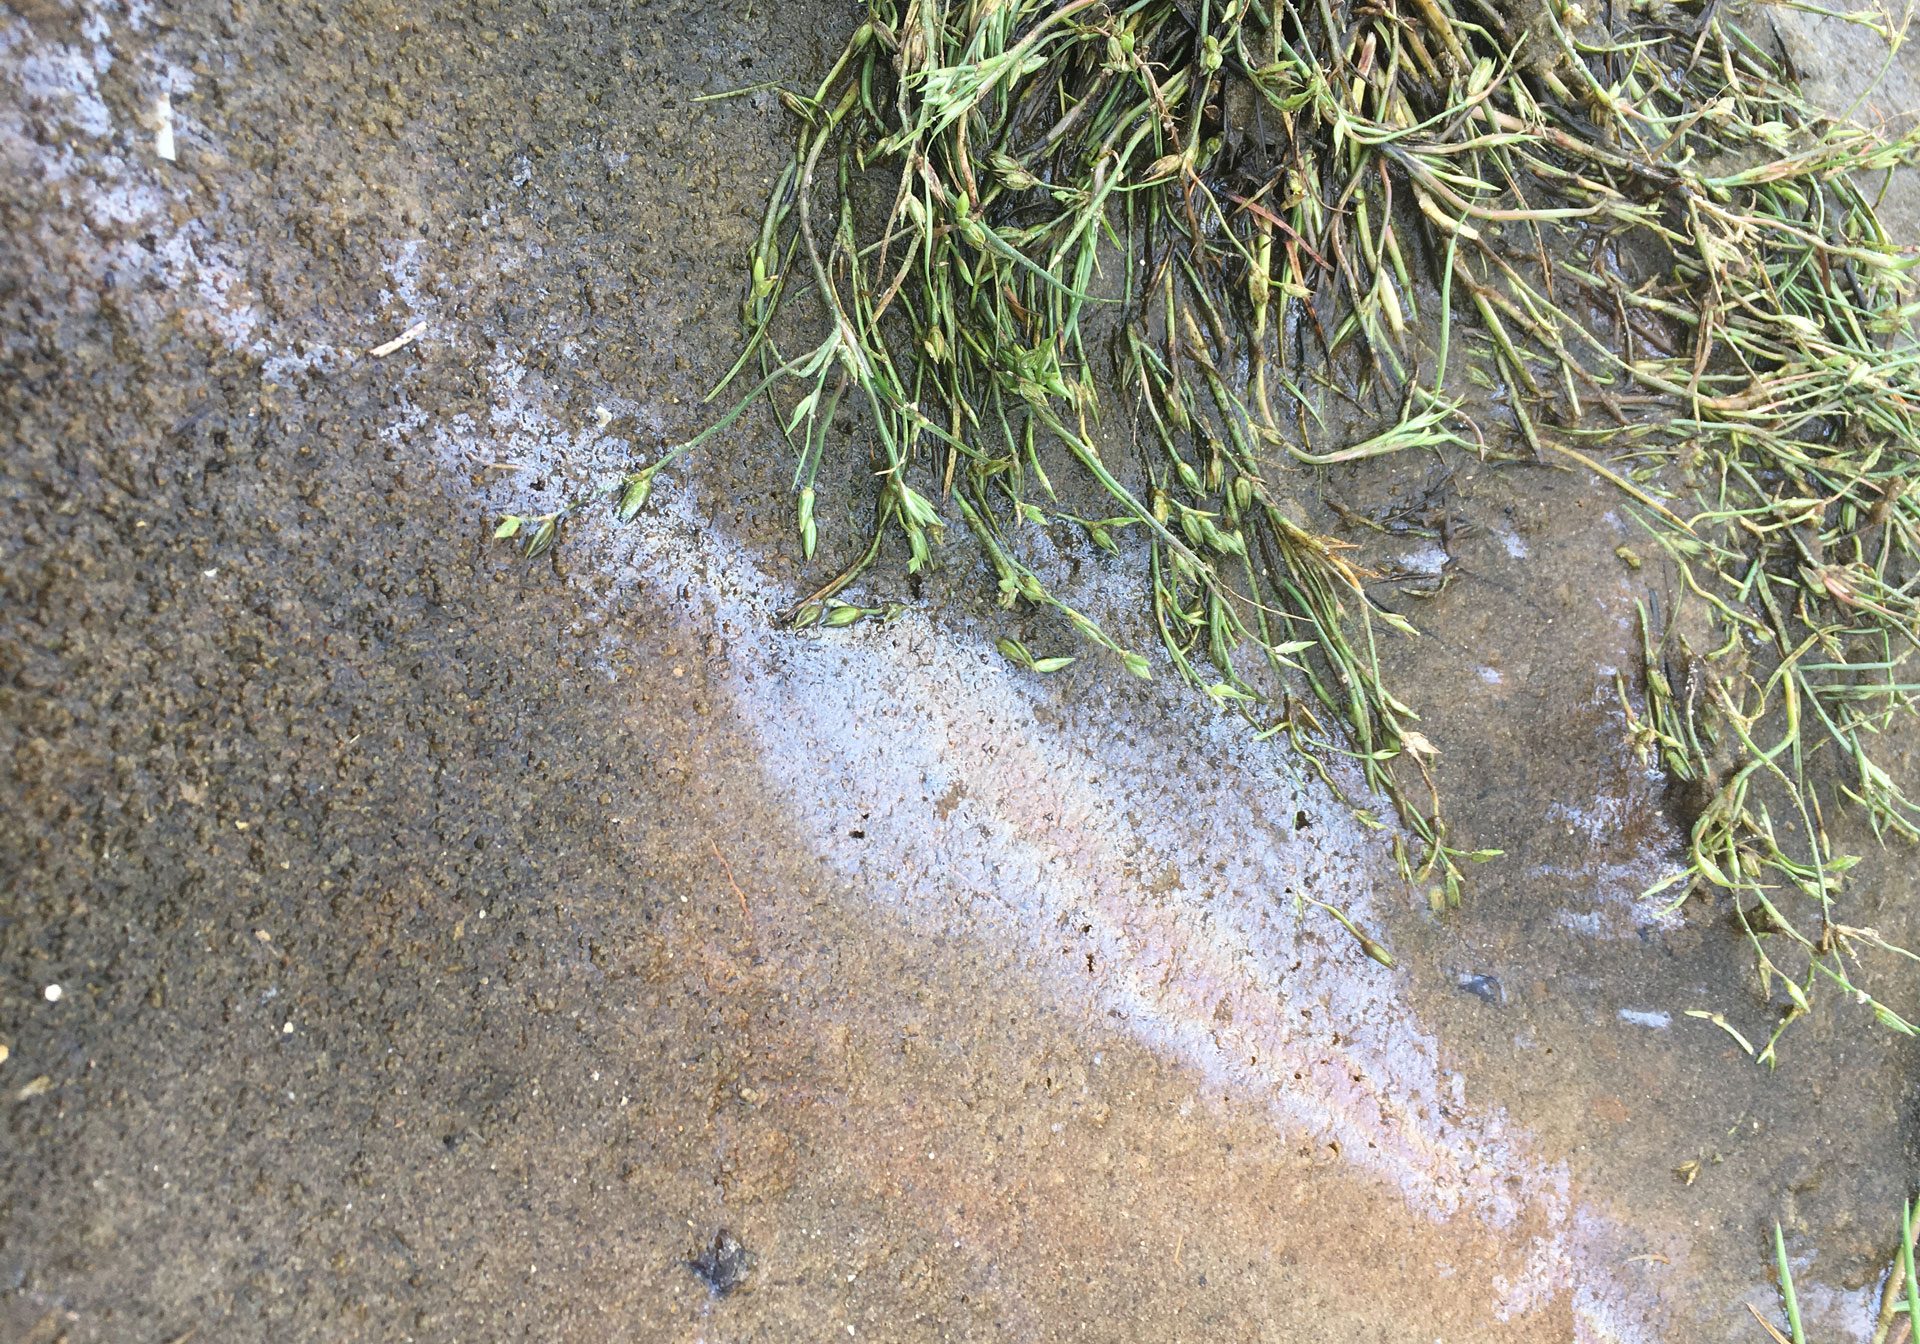 This may be petrol, oil or other vehicle related pollution from surface water, or perhaps from cracked mis-connected domestic drains, or worse. Tests needs to be conducted and the problems fixed.